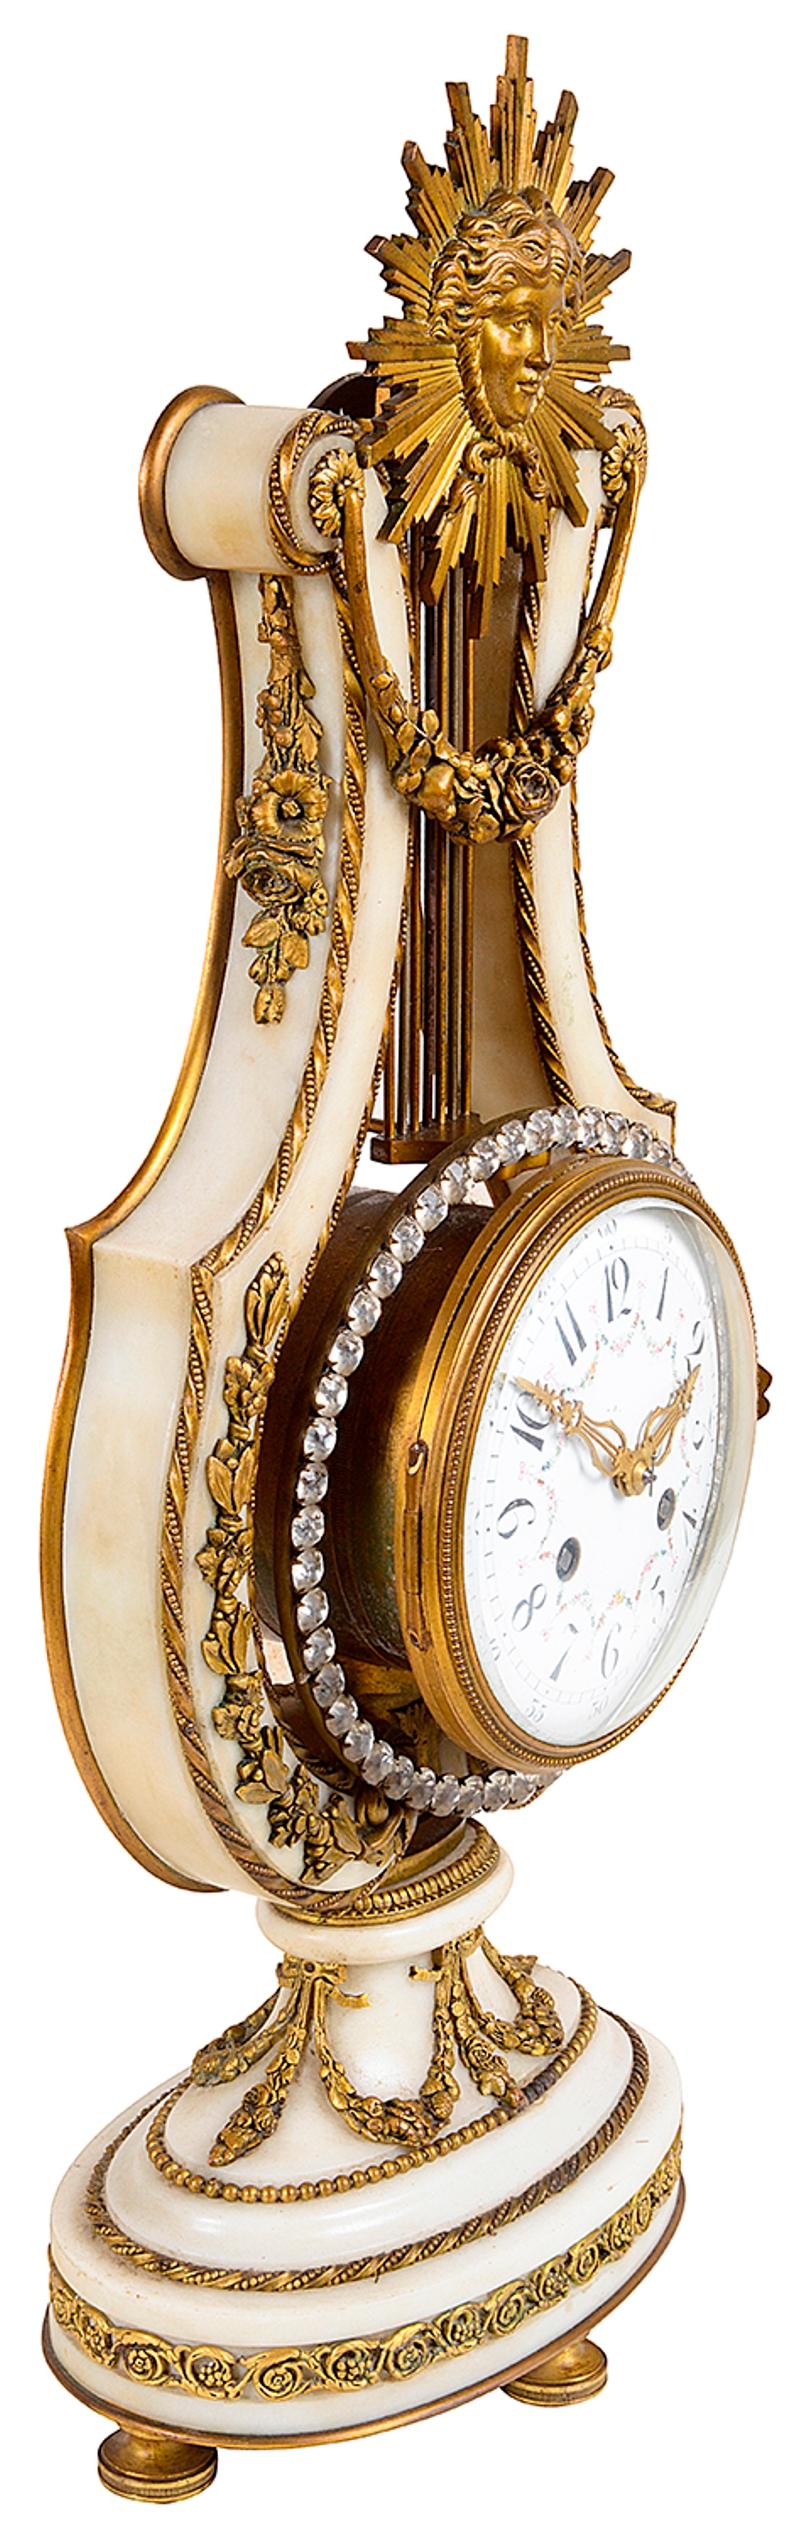 A good quality 19th century French white marble and gilded ormolu mantel clock in the shape of a Lyre. Having a sun burst mount above gilded ormolu garlands of flowers, set into the lyre with a white enamel clock face, an eight day duration